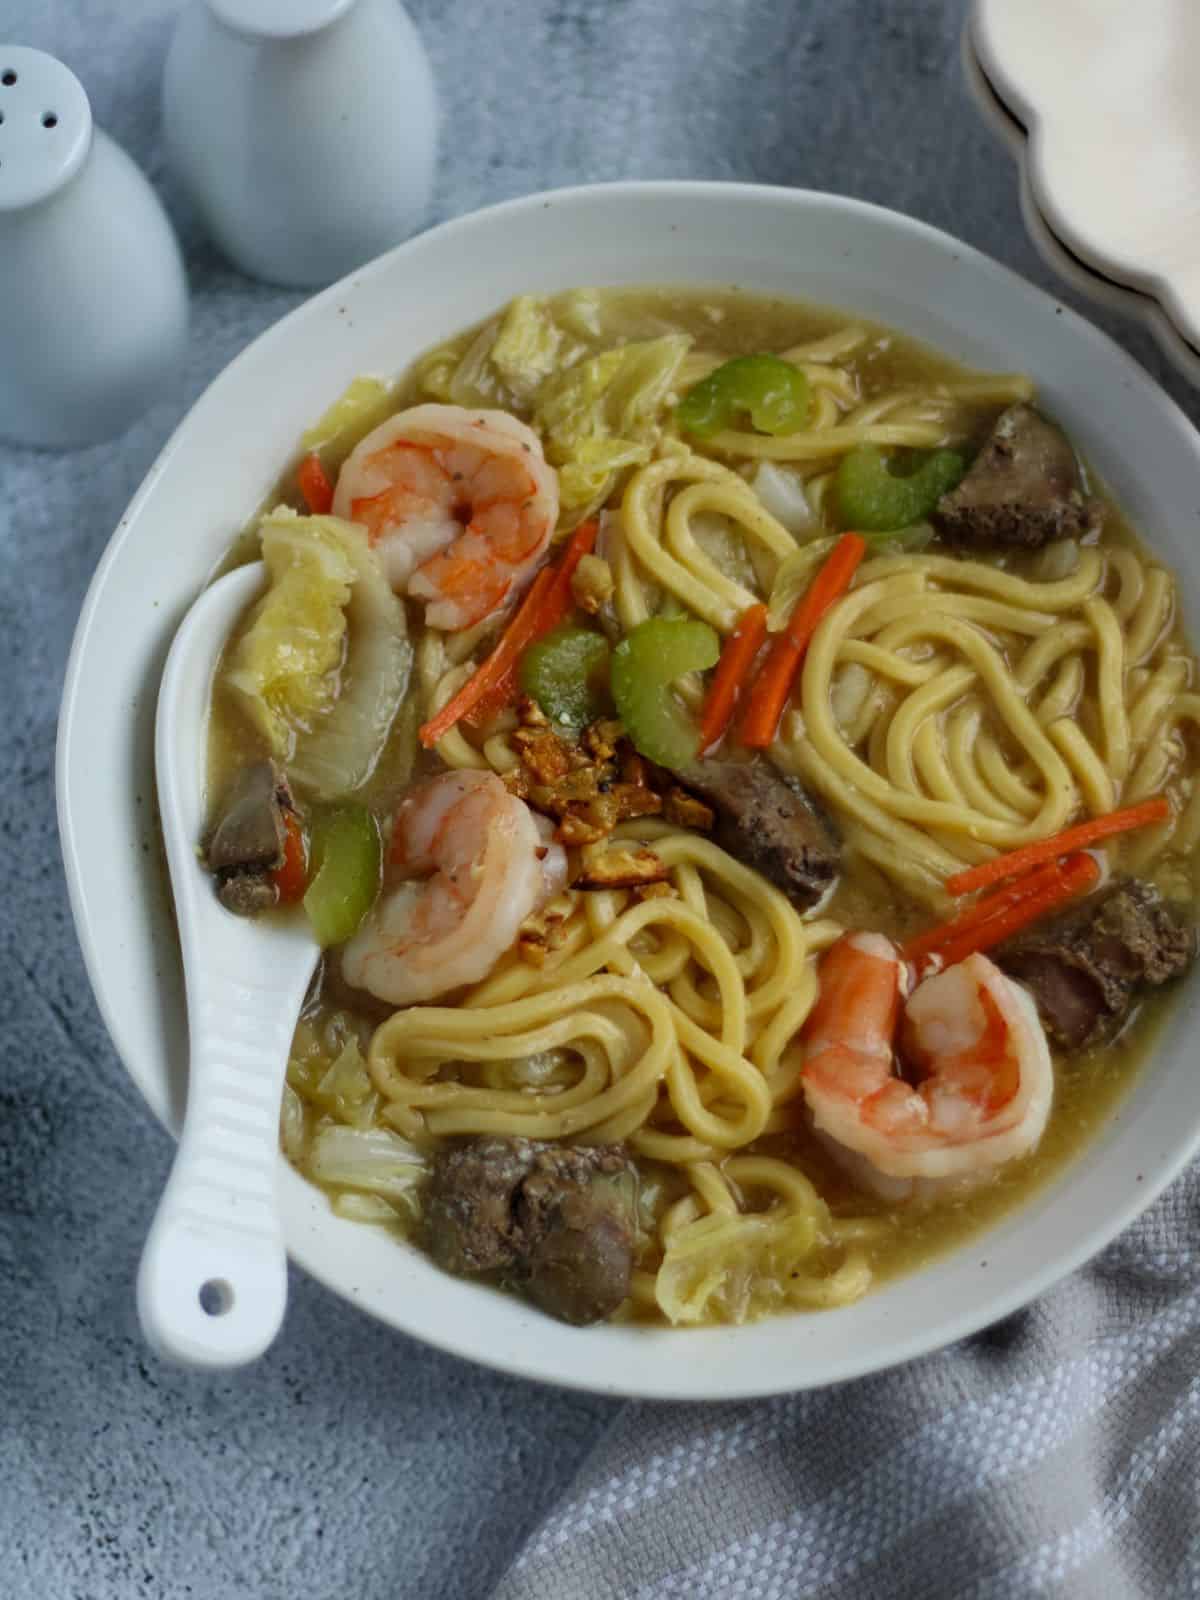 Pancit lomi in a bowl with spoon.